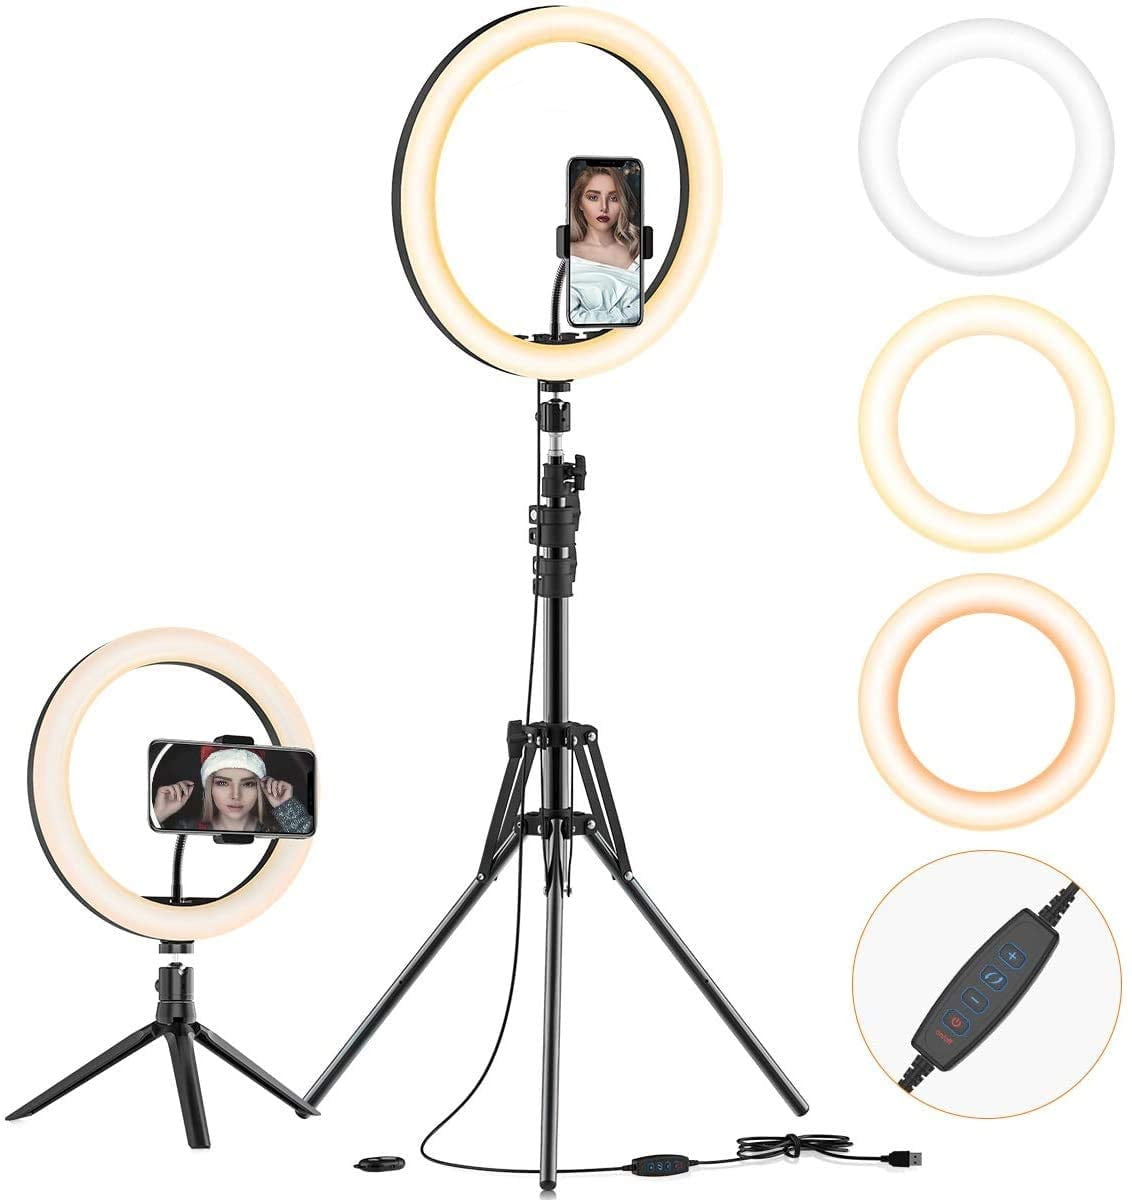 Color : Black Style 1 JIAX LED Ring Light with Tripod Stand and Phone Holder for Selfie，with 3 Light Modes，Portable Travel Triangle Floor Selfie Stick，Adjustable Color Temperature Warm